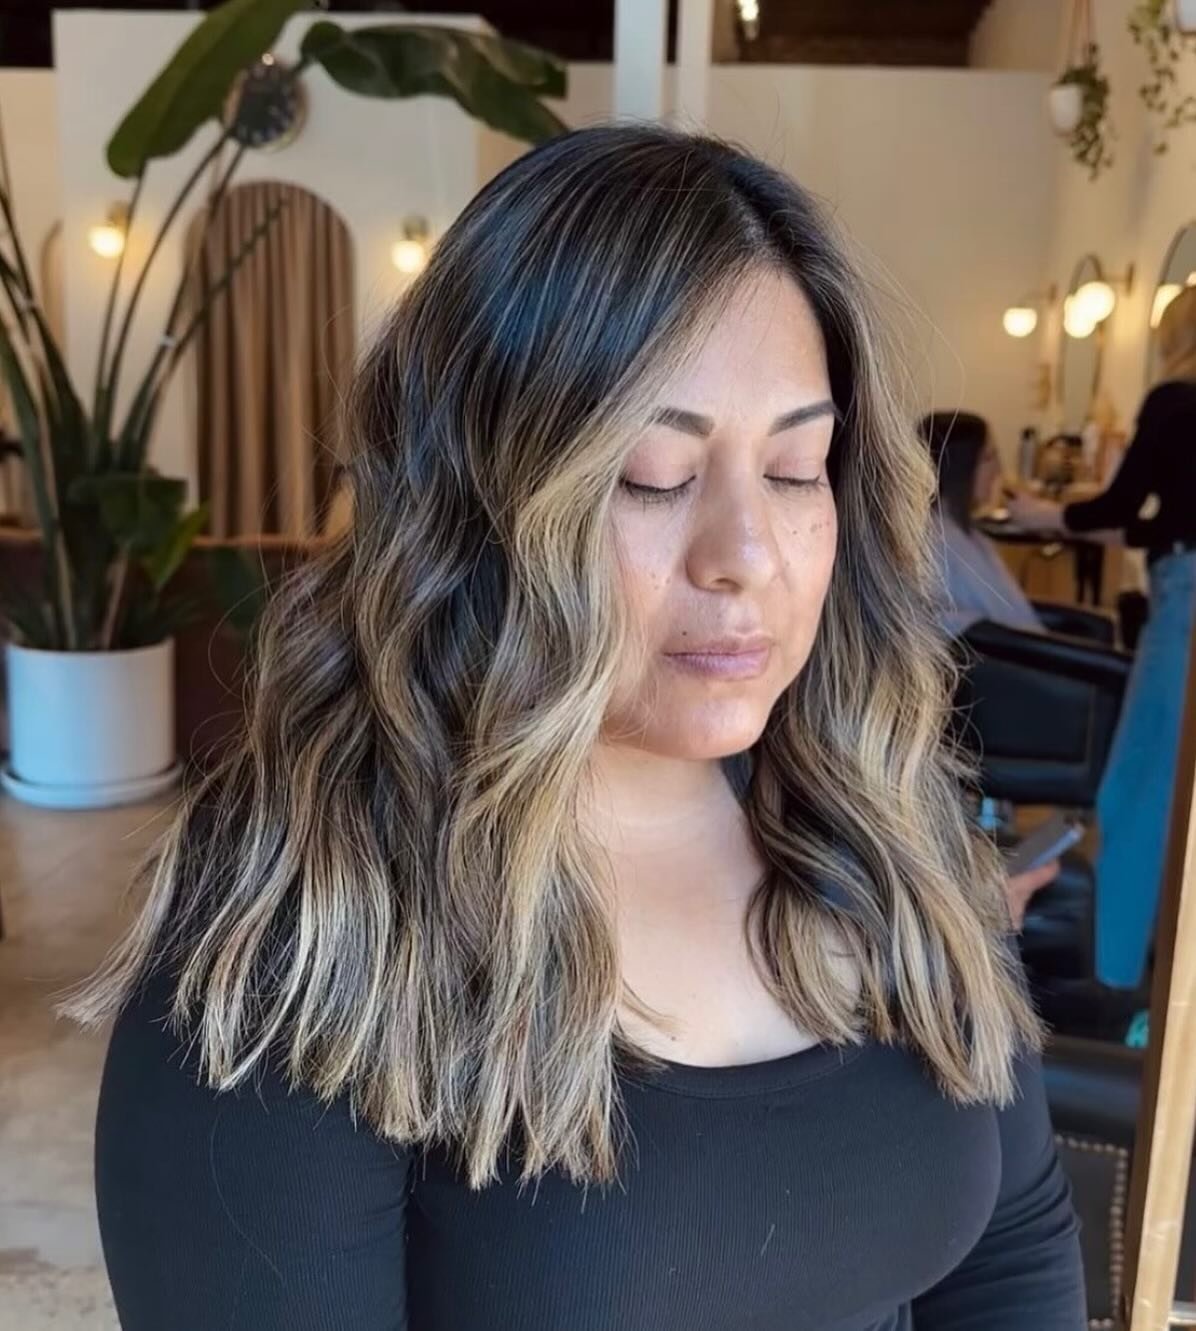 Adding some soft, sun kissed highlights is the perfect way to welcome the Spring season🌸💓

Whether you&rsquo;re craving some more dimension, or wanting to go brighter, we&rsquo;re here to help! 

Hair by @mellikeshair 🤍✨